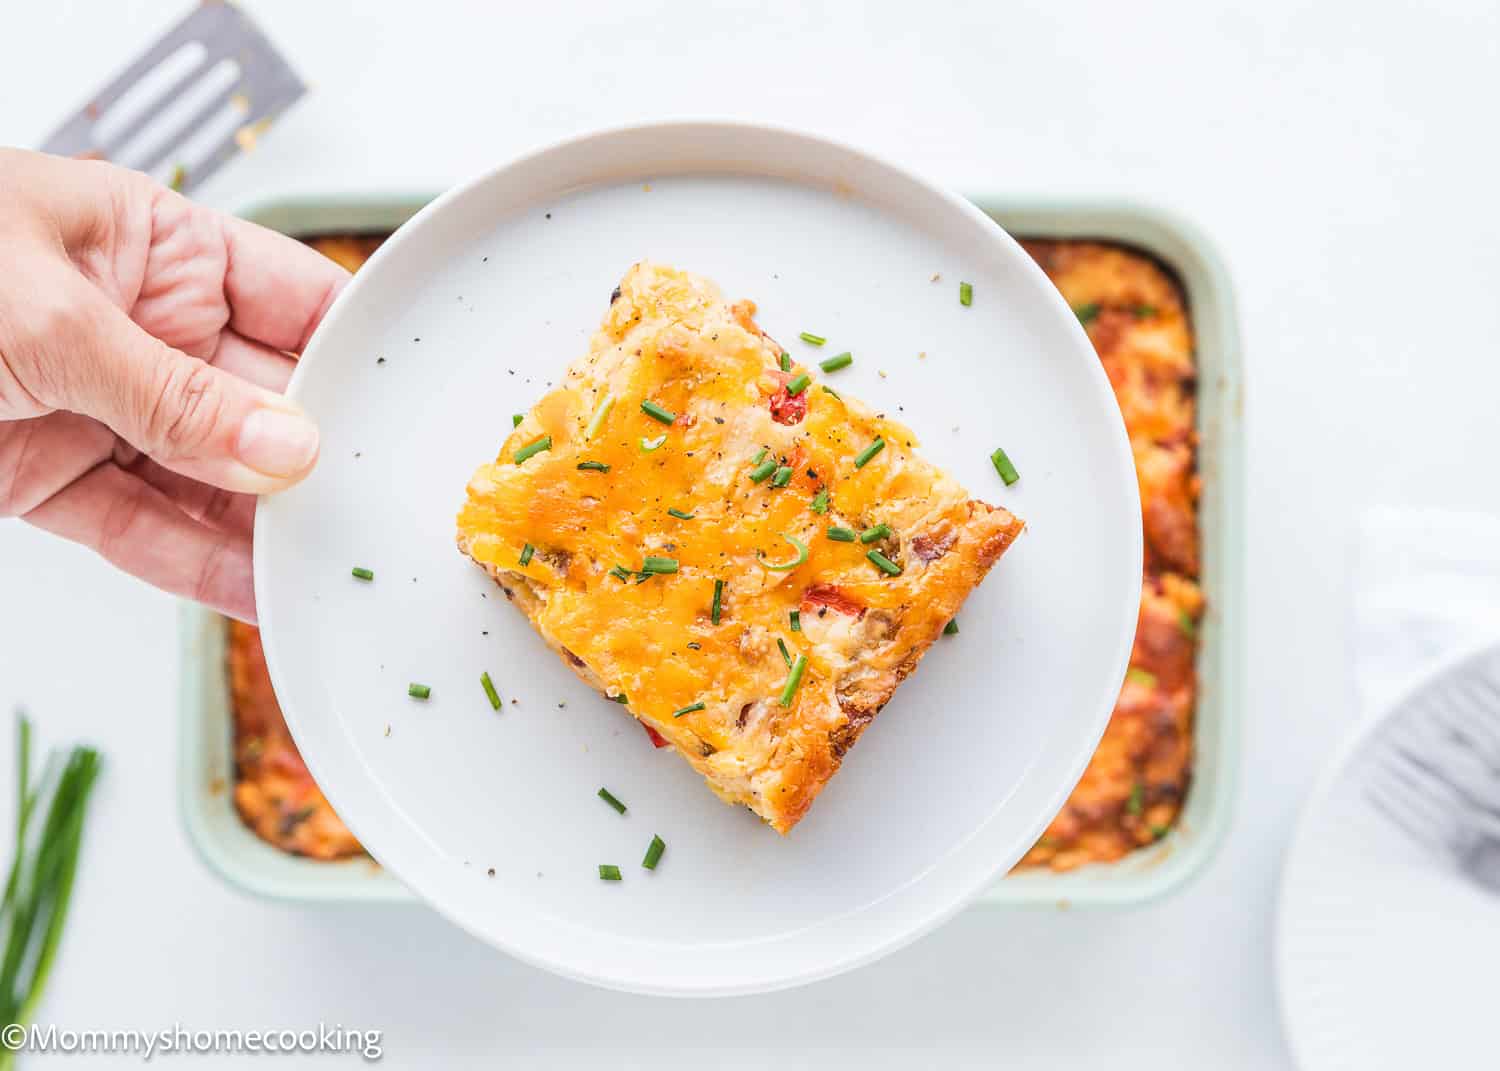 a woman hand holding a plate with a slice of Breakfast Casserole Without Eggs.